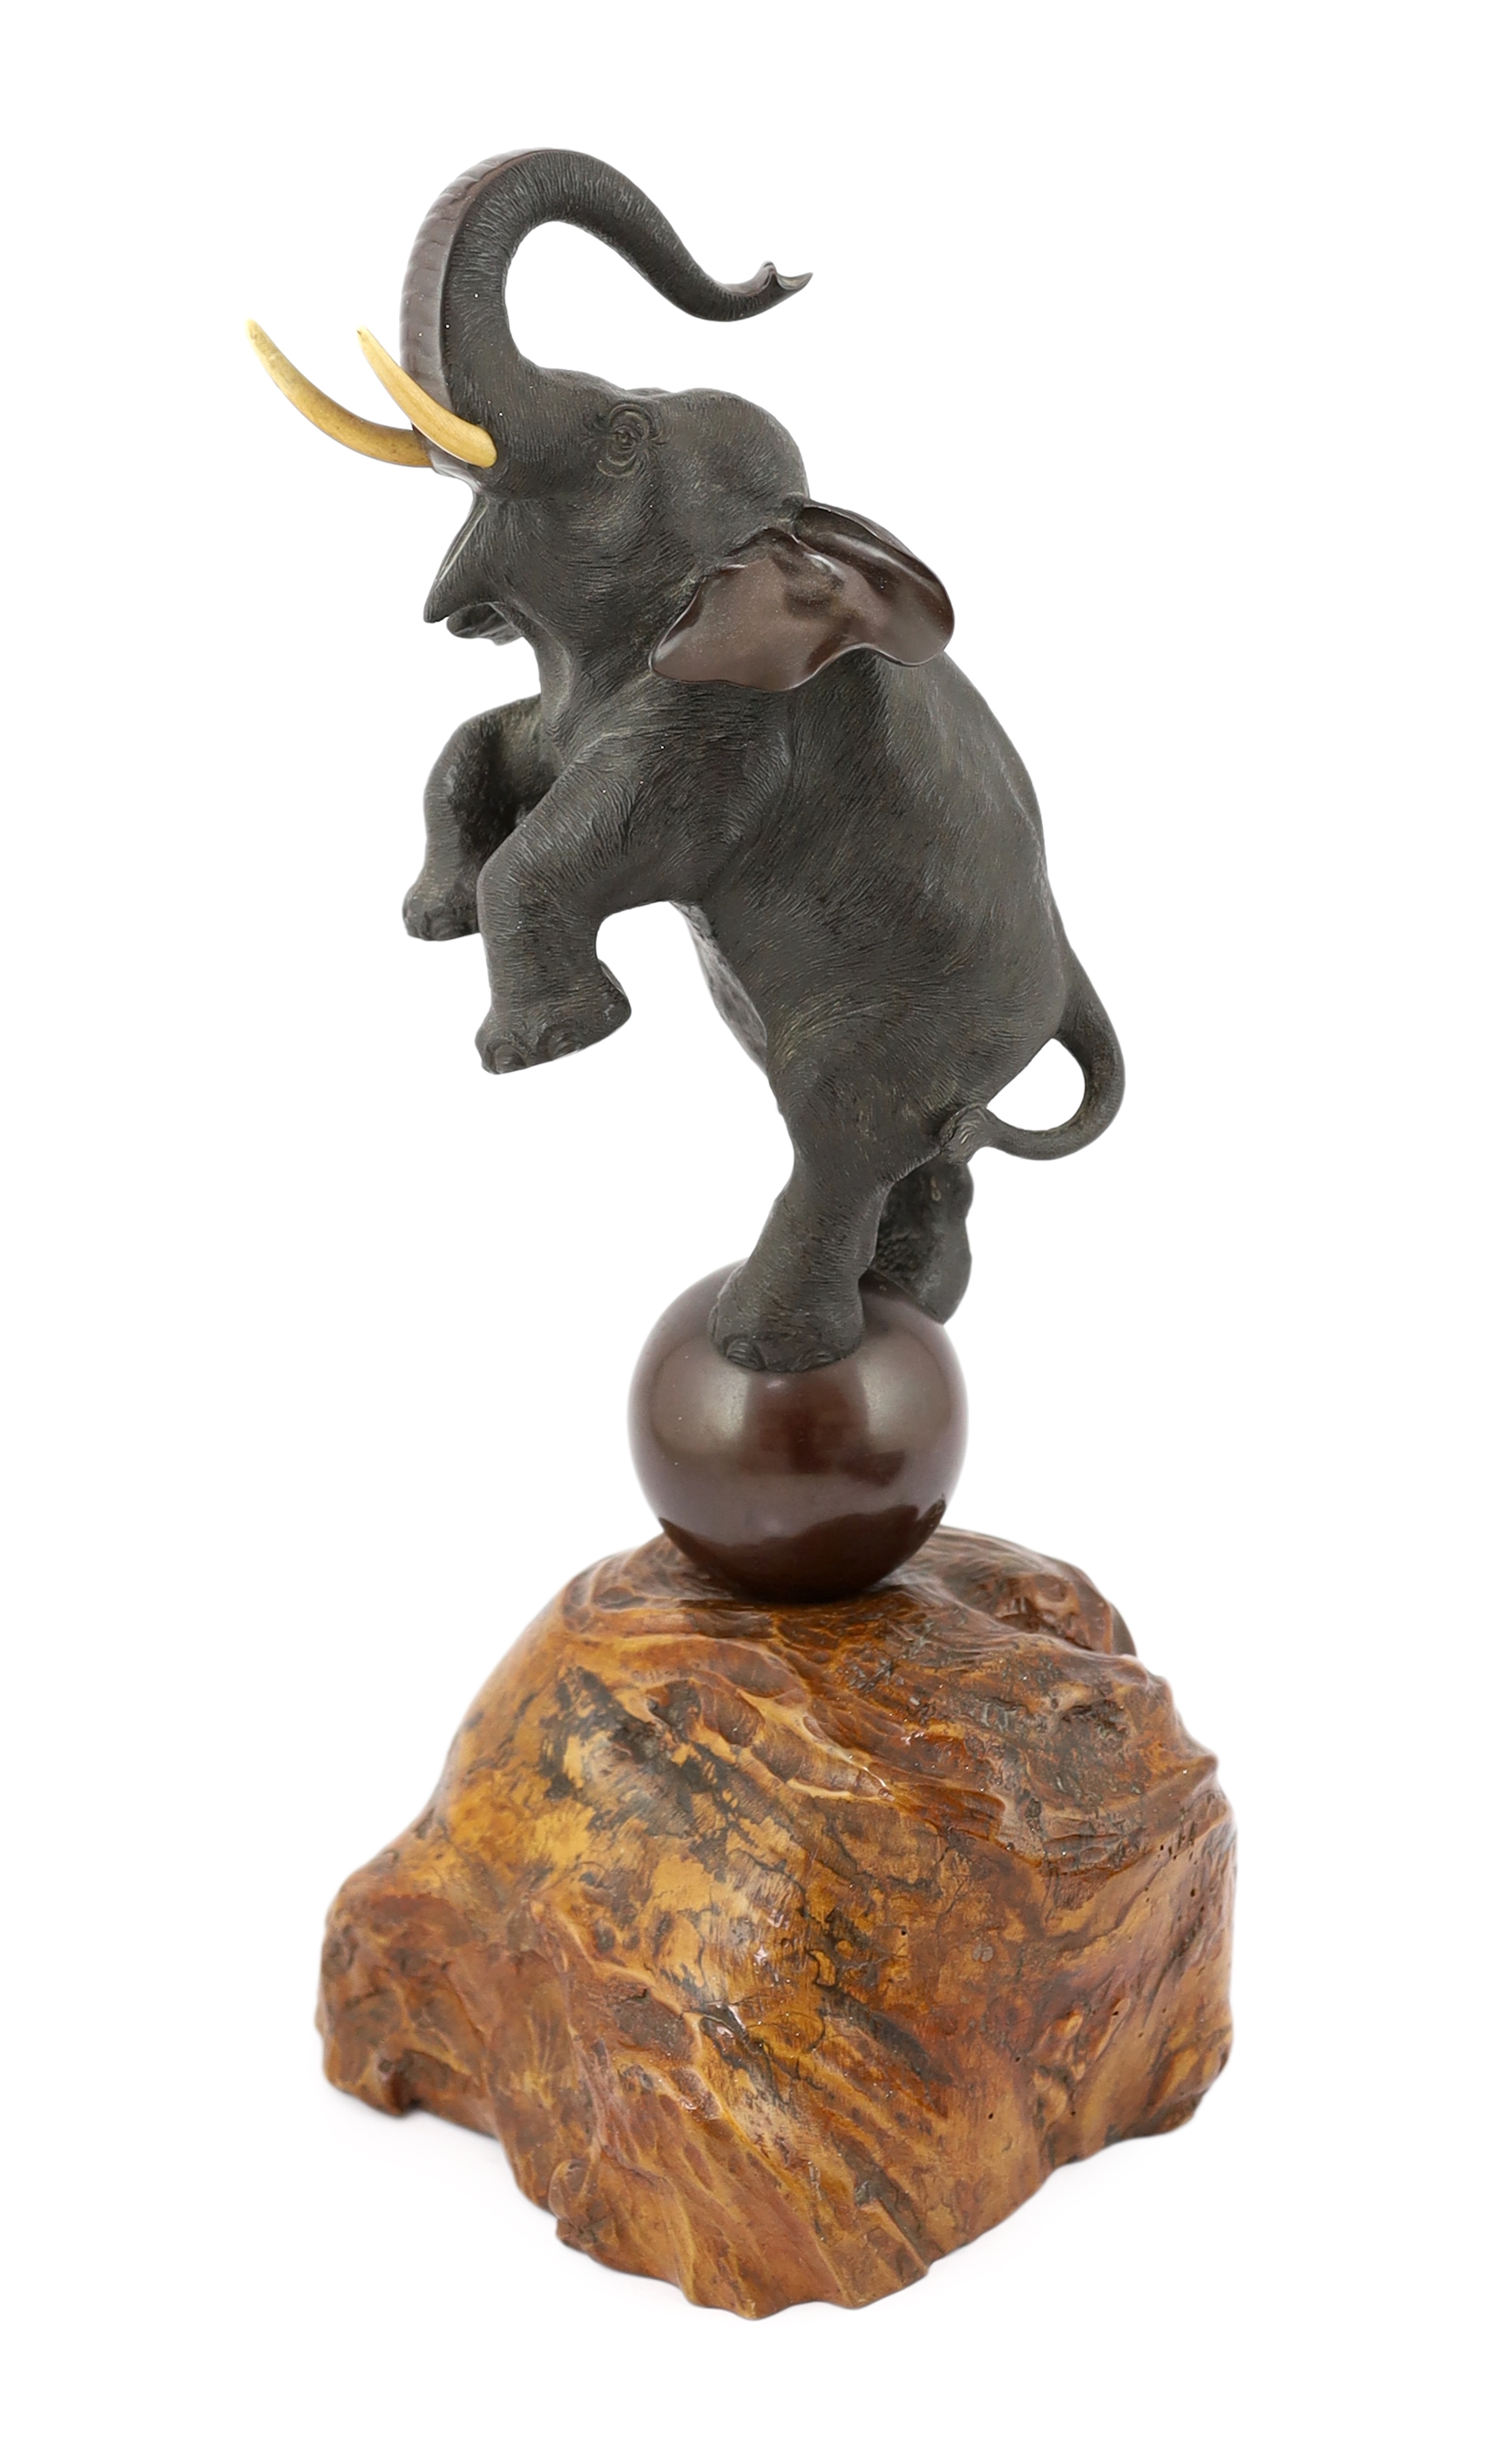 A Japanese bronze model of a rearing elephant standing on a ball, Meiji period